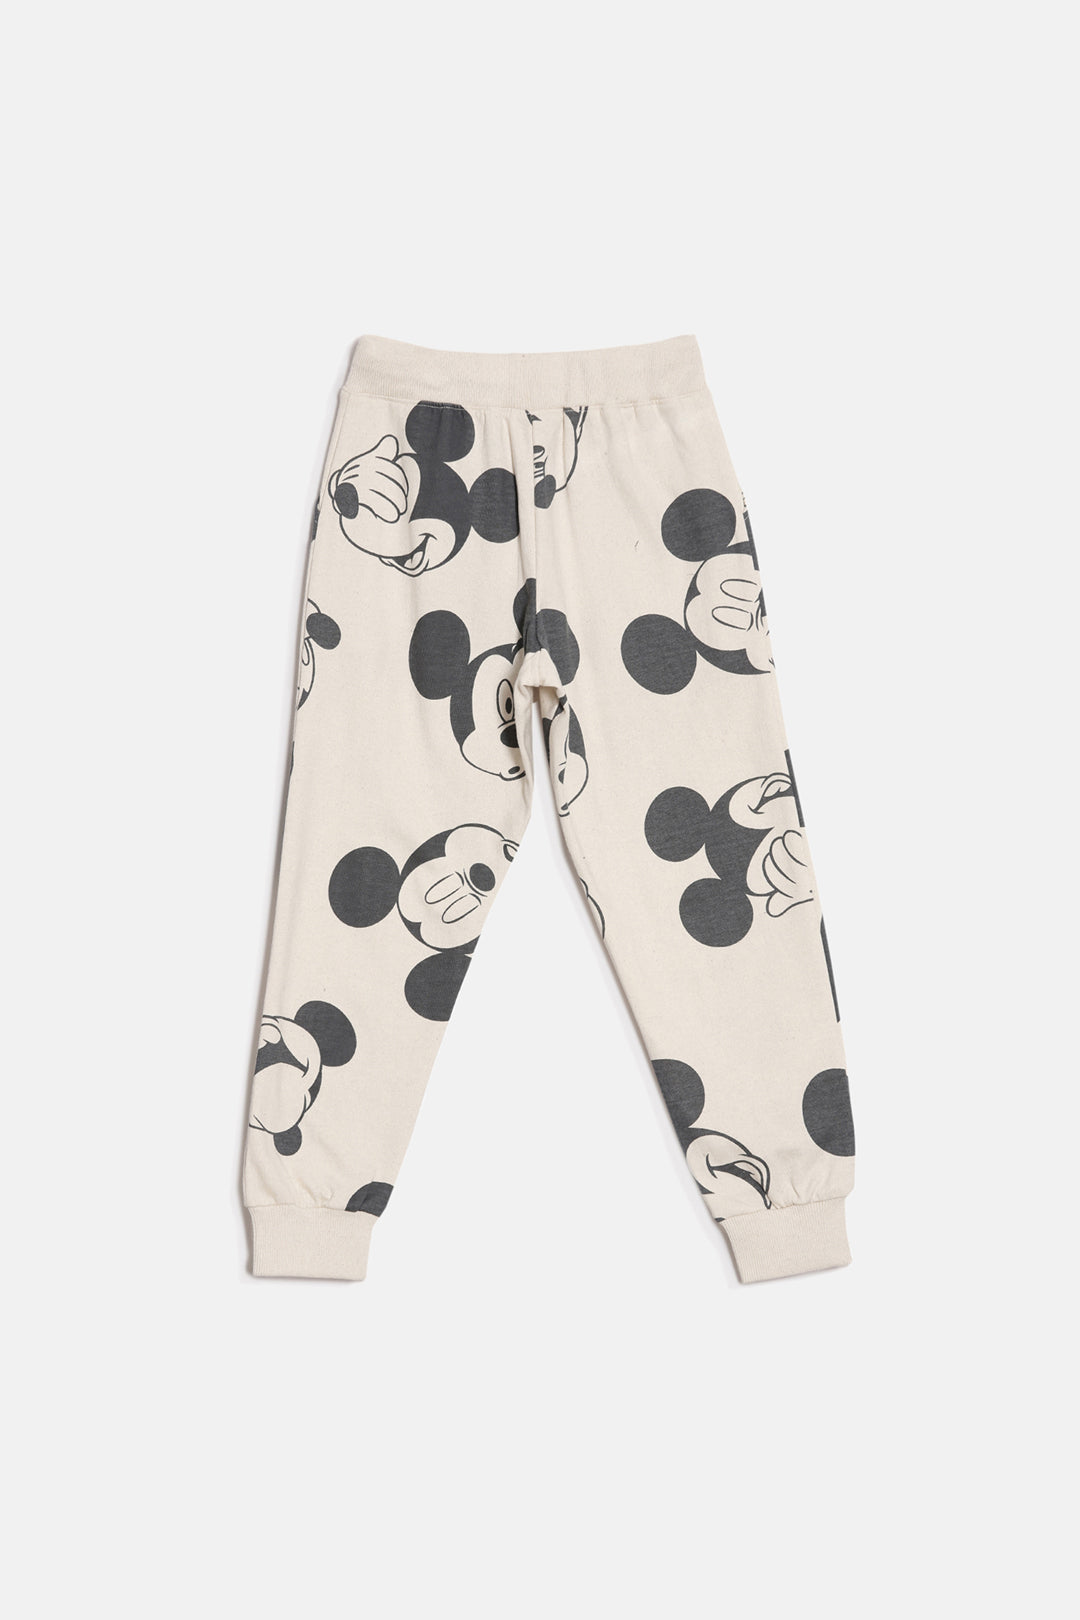 Iconic Mickey Co-ords set